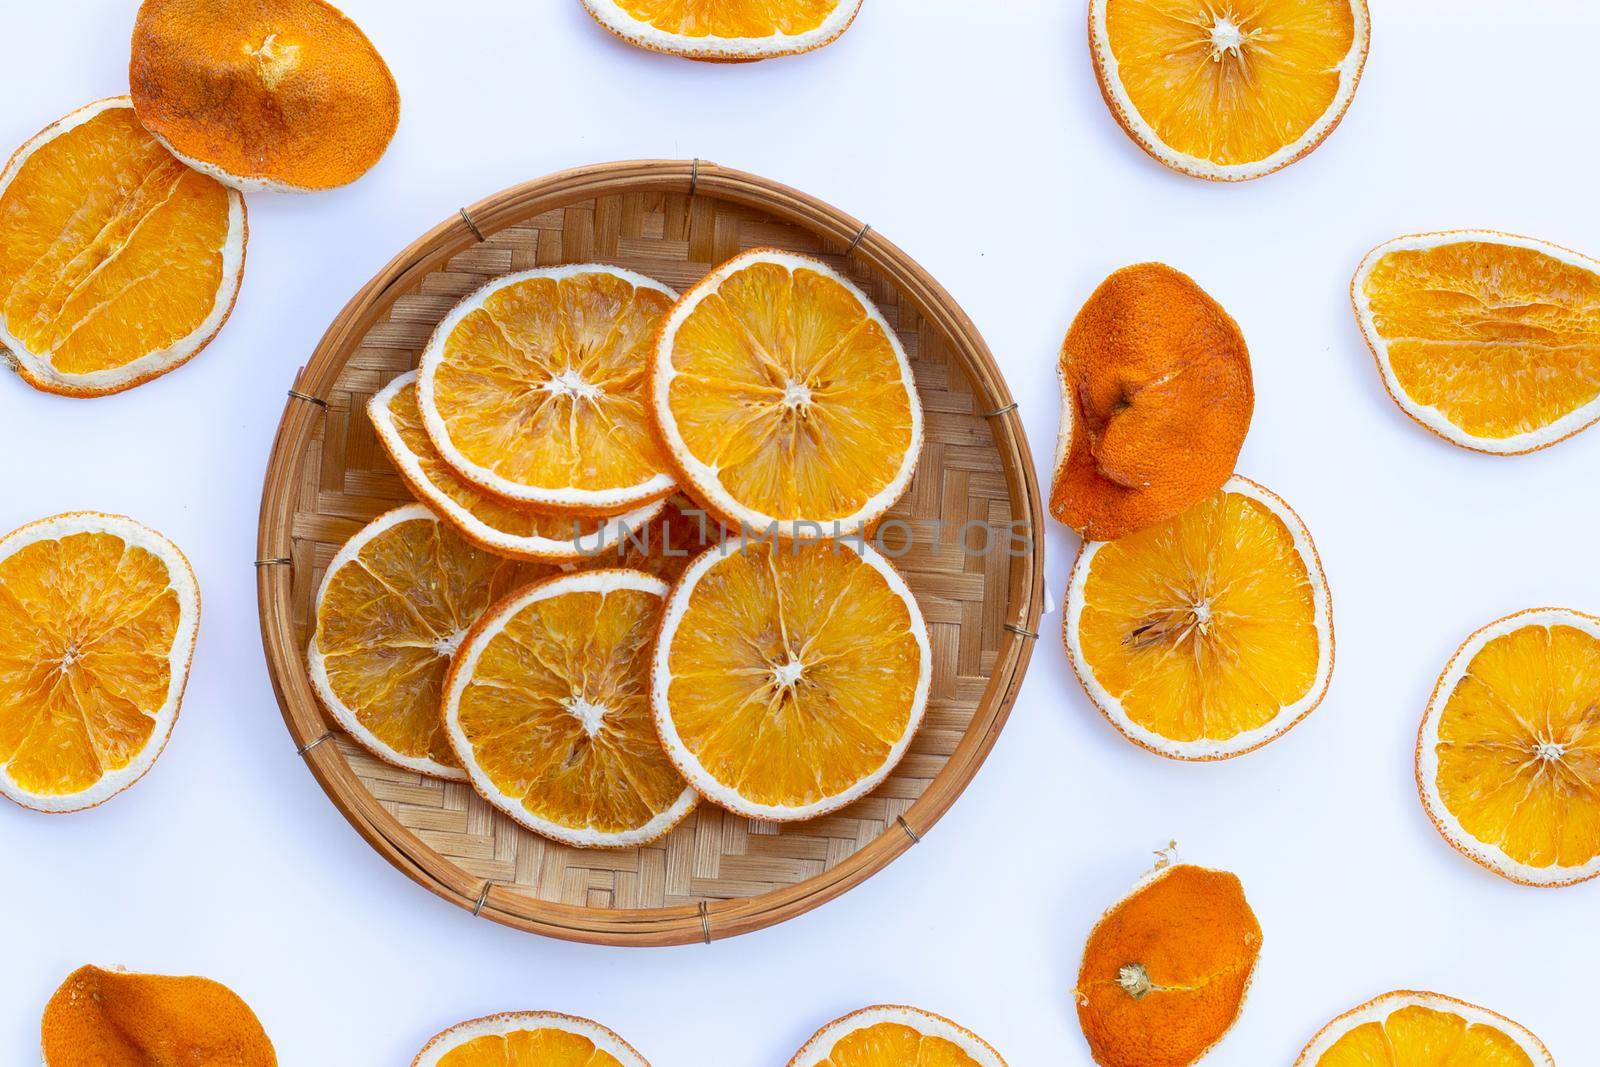 Dried orange slices on white background. by Bowonpat